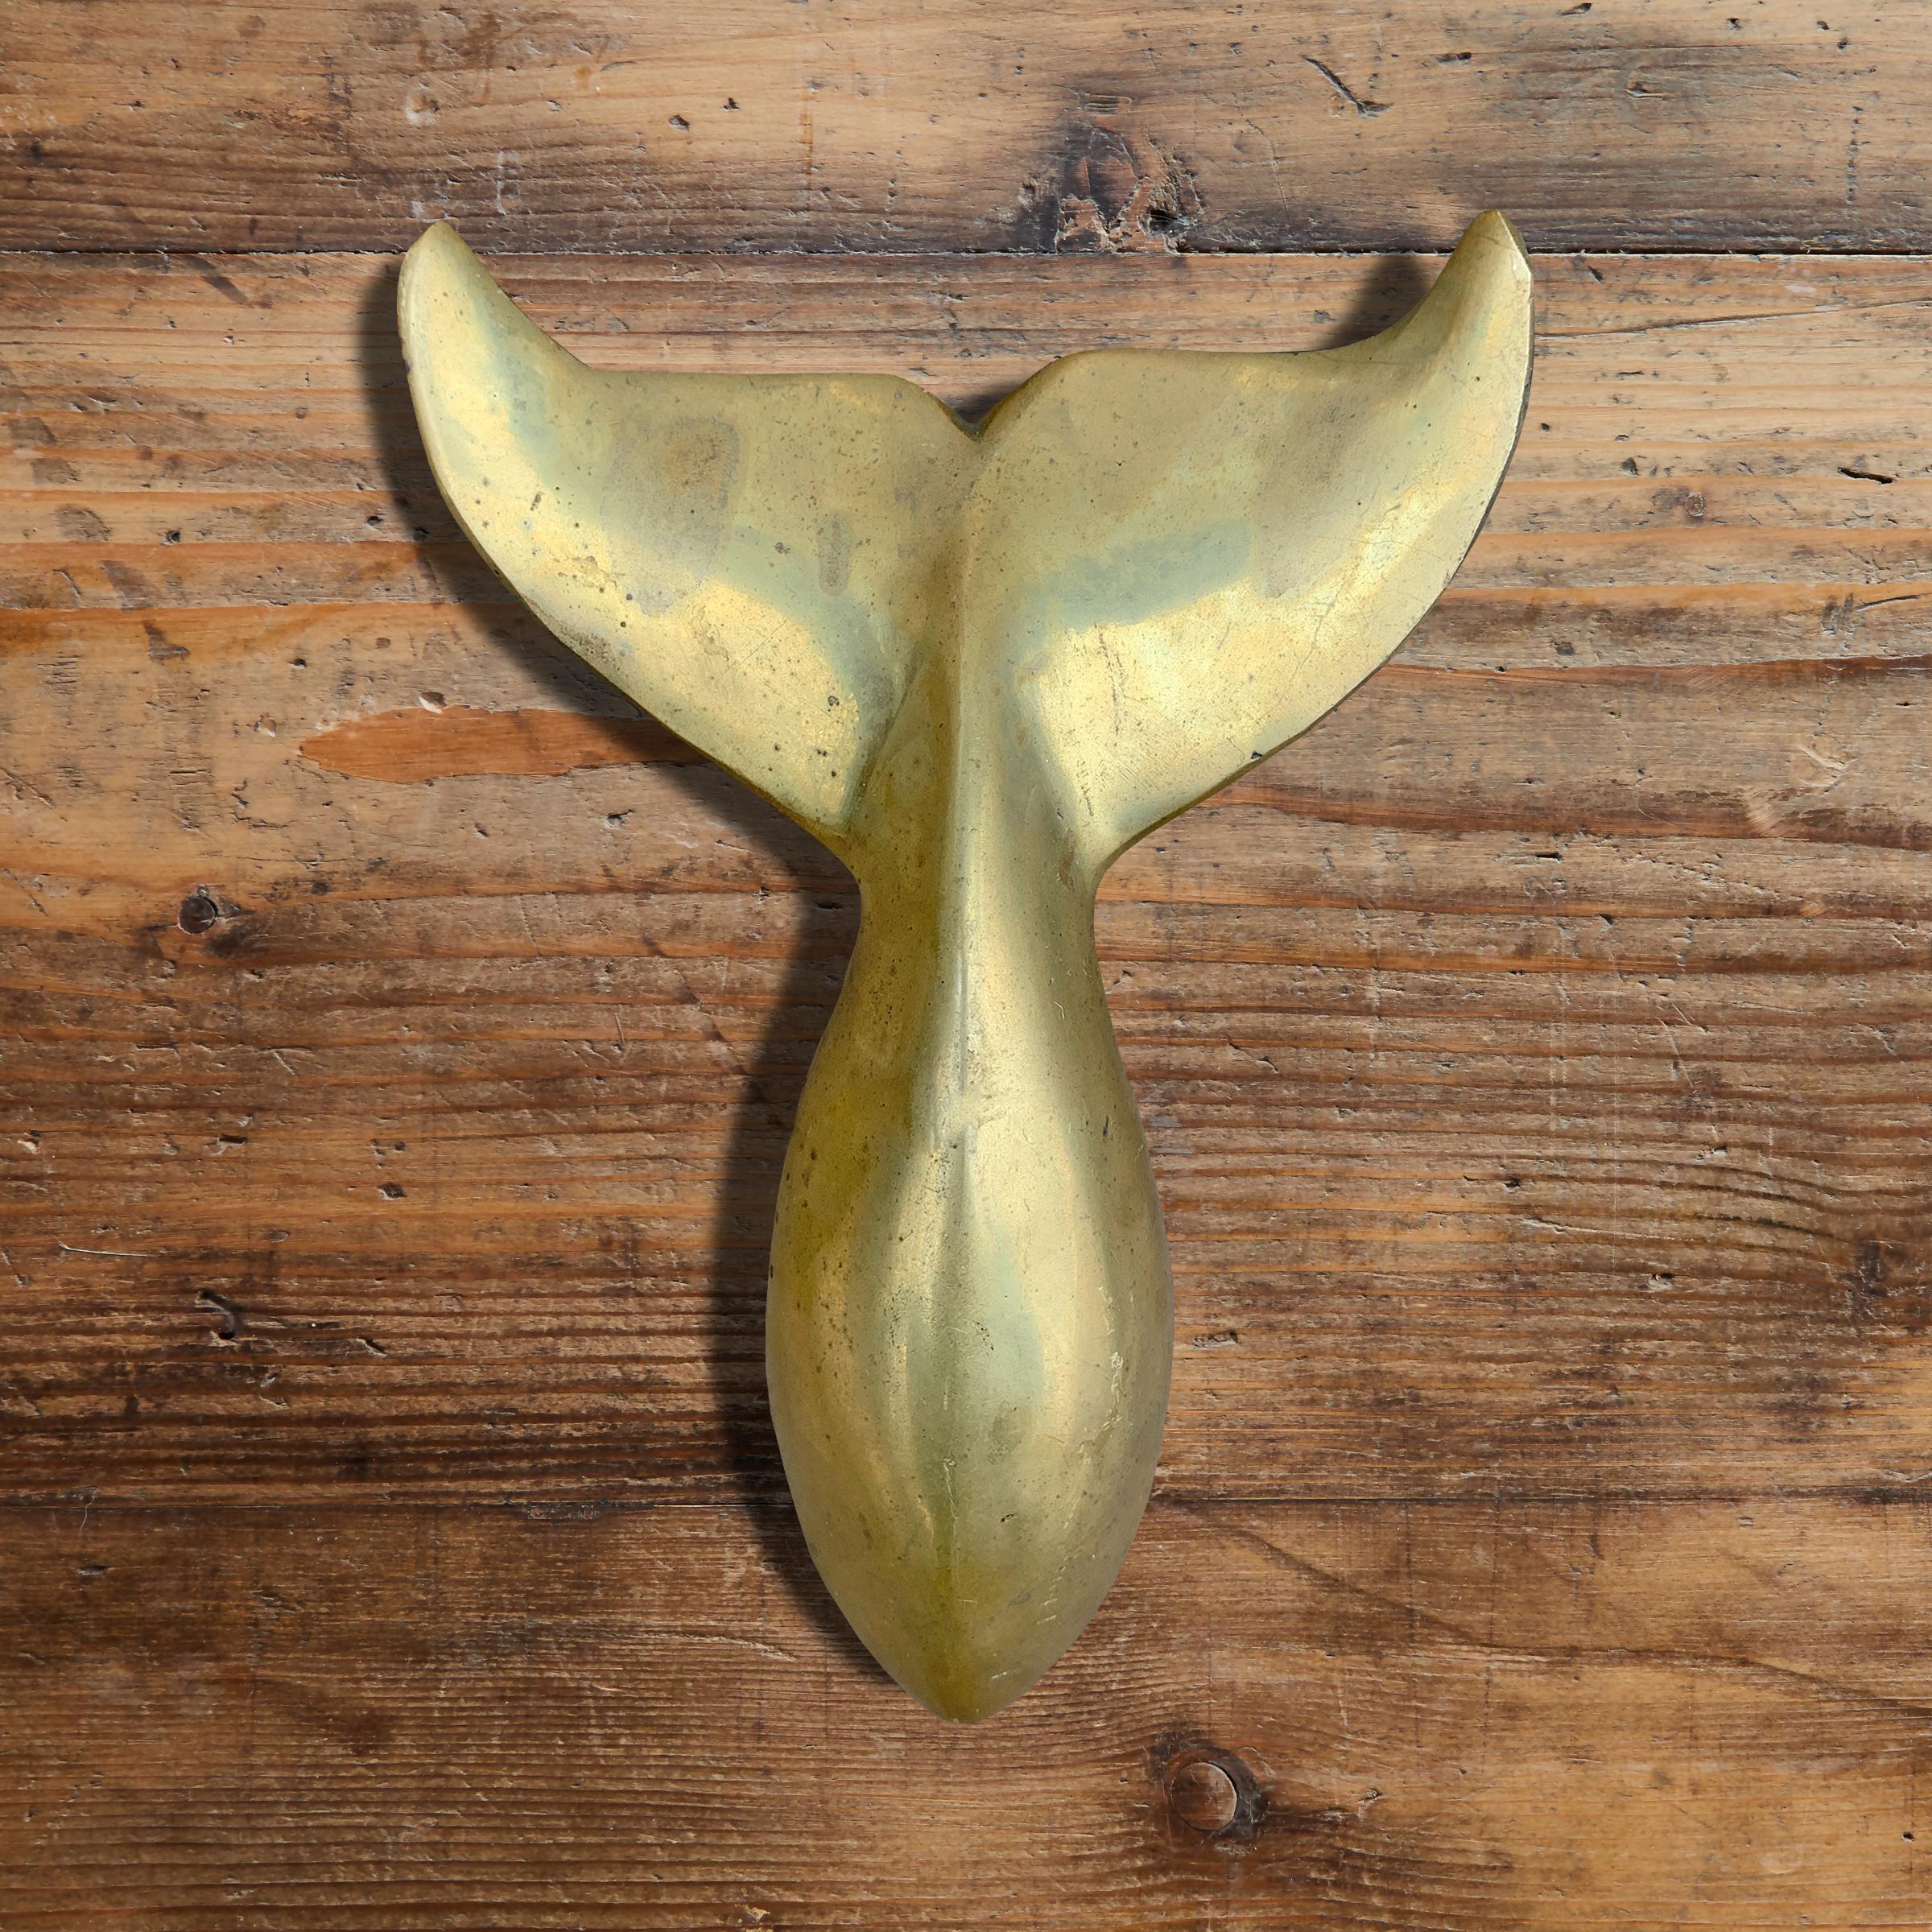 A beautiful sculptural mid-20th century American cast bronze whale tail doorknocker with a heavy hand and a wonderful patina.